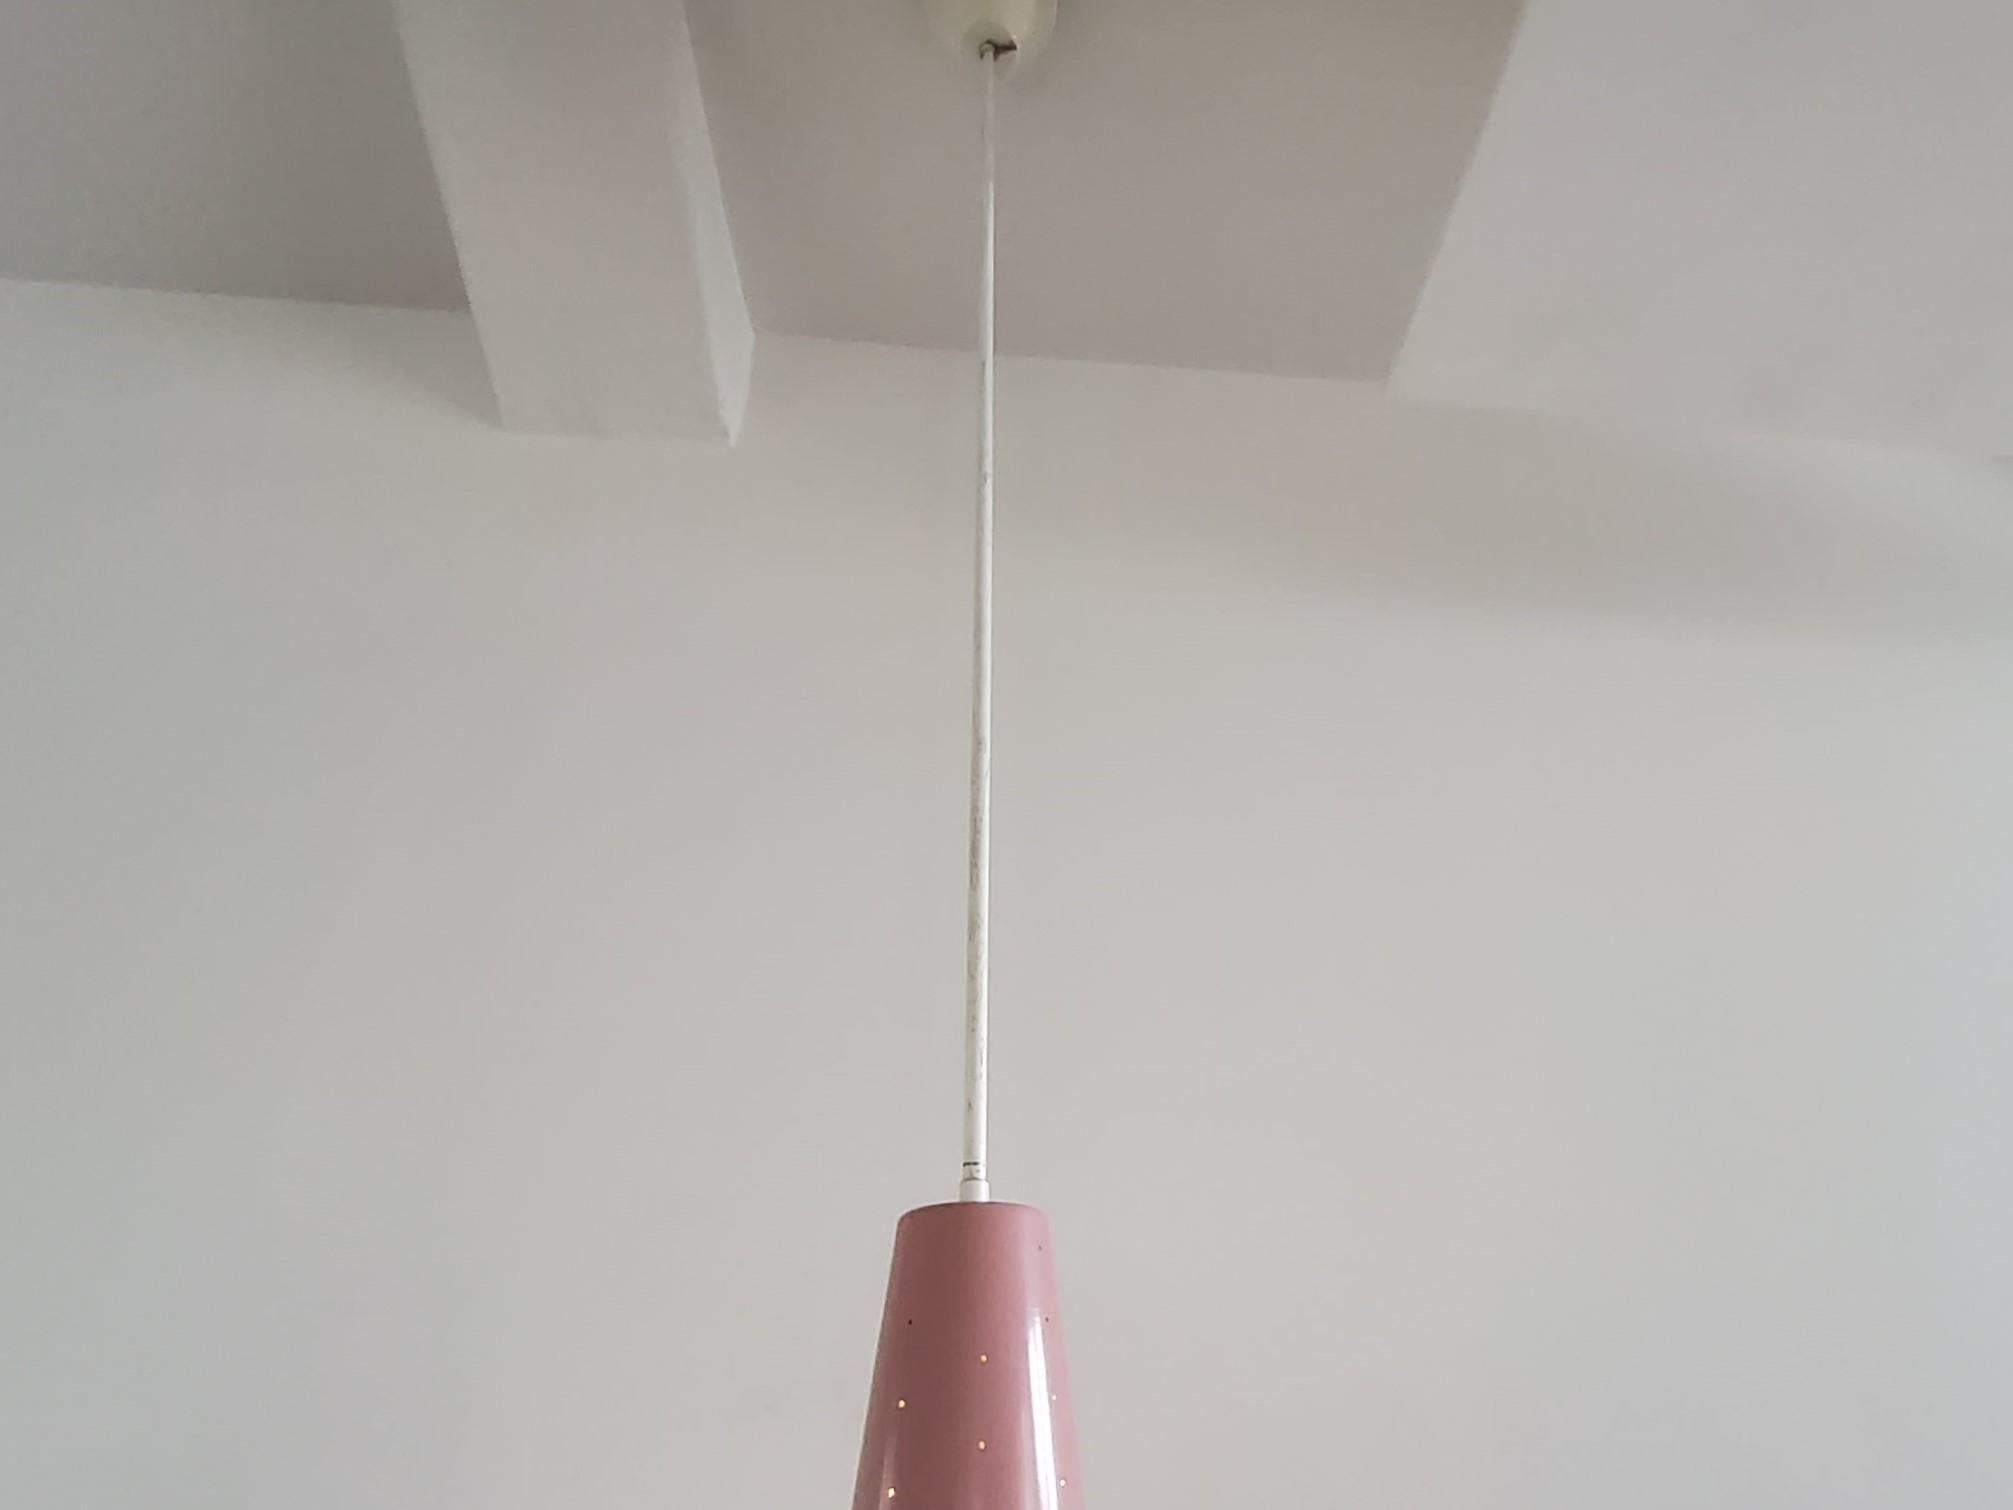 Mid-Century Modern Rare Model 205 Pink Conical Pendant Lamp from Evenblij, The Netherlands 1960's For Sale